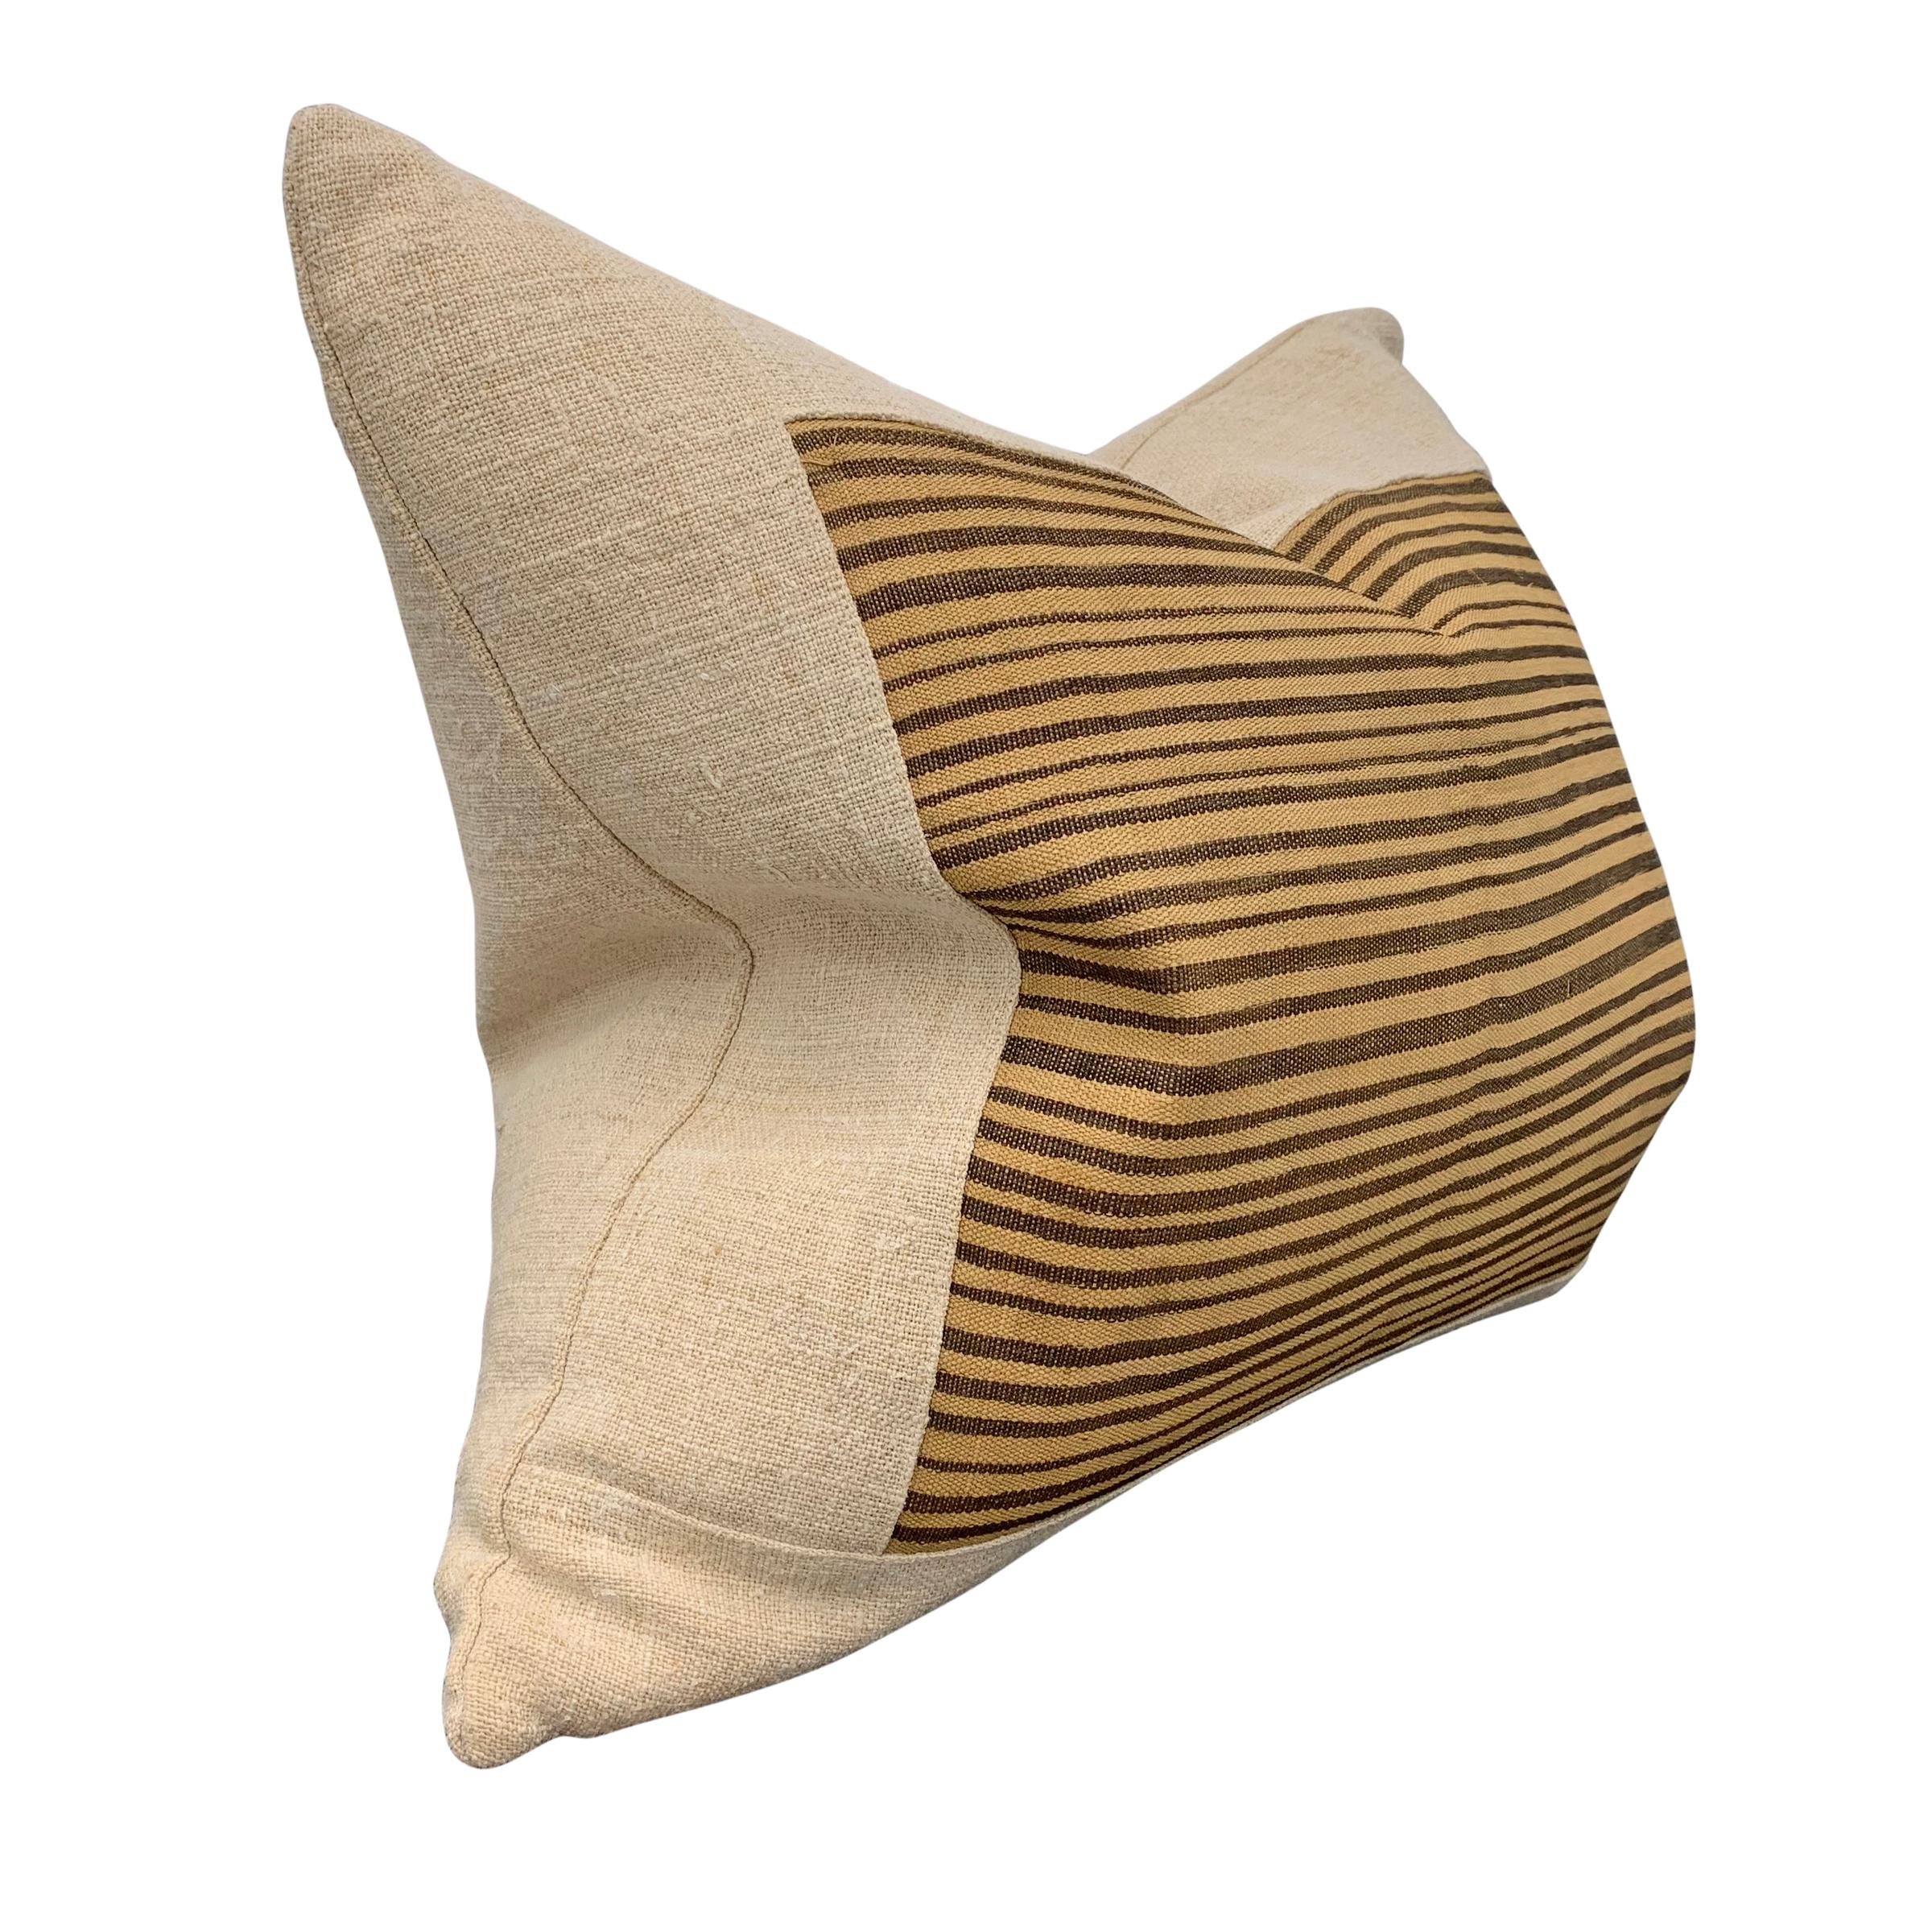 A pillow made from a mid-20th century Kuba cloth, backed with linen and filled with down. Kuba cloth is a raffia fabric woven from thin strips of palm leaf fibers, woven by Kuba women of the Democratic Republic of the Congo into ceremonial skirts